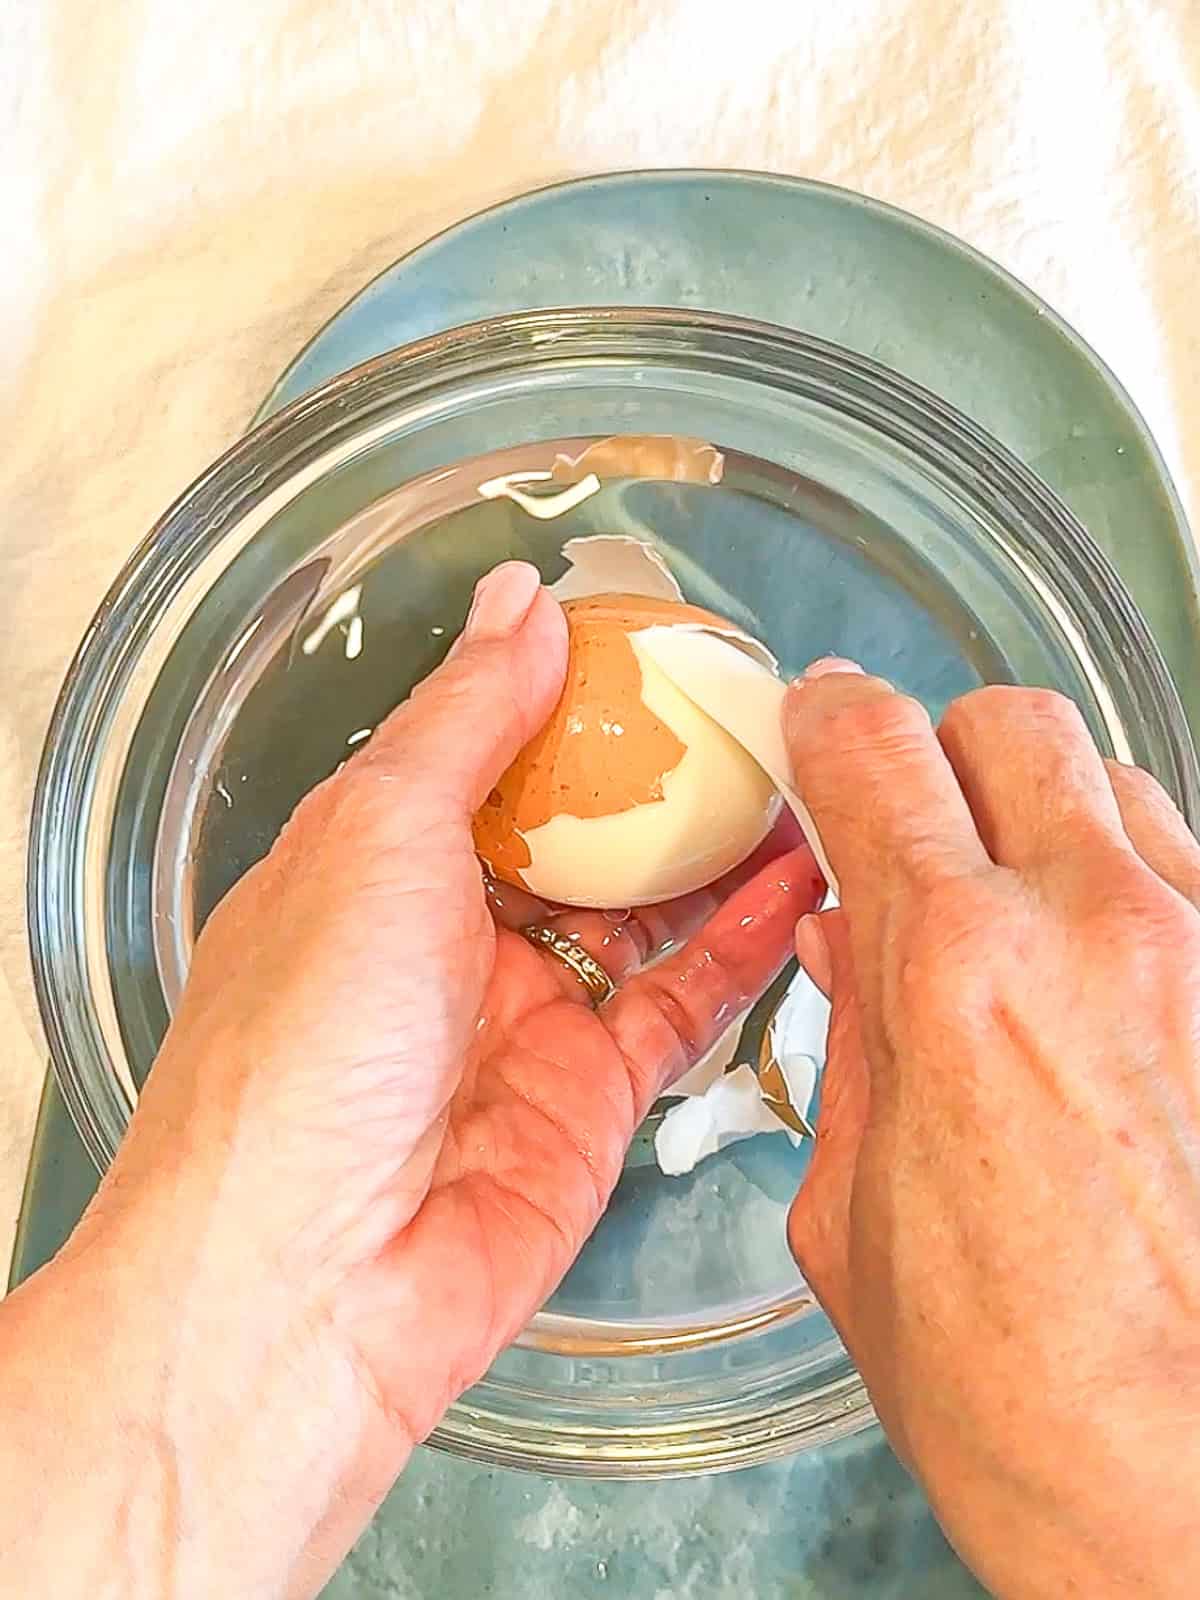 Using a spoon to loosen and remove egg shell from hard boiled egg.